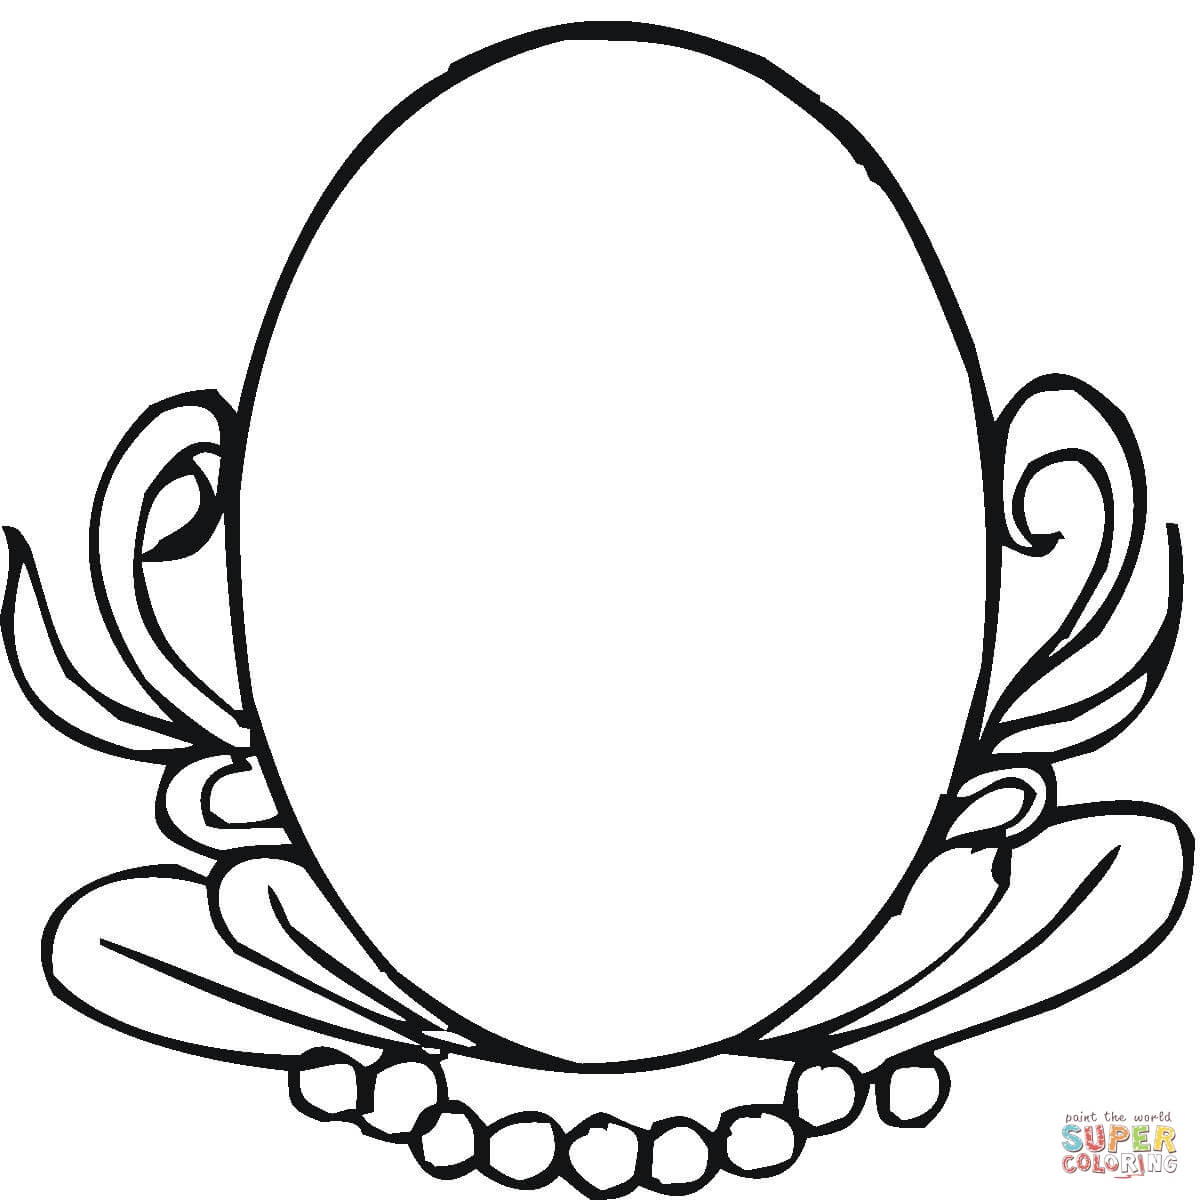 Oval Mirror coloring page | Free Printable Coloring Pages